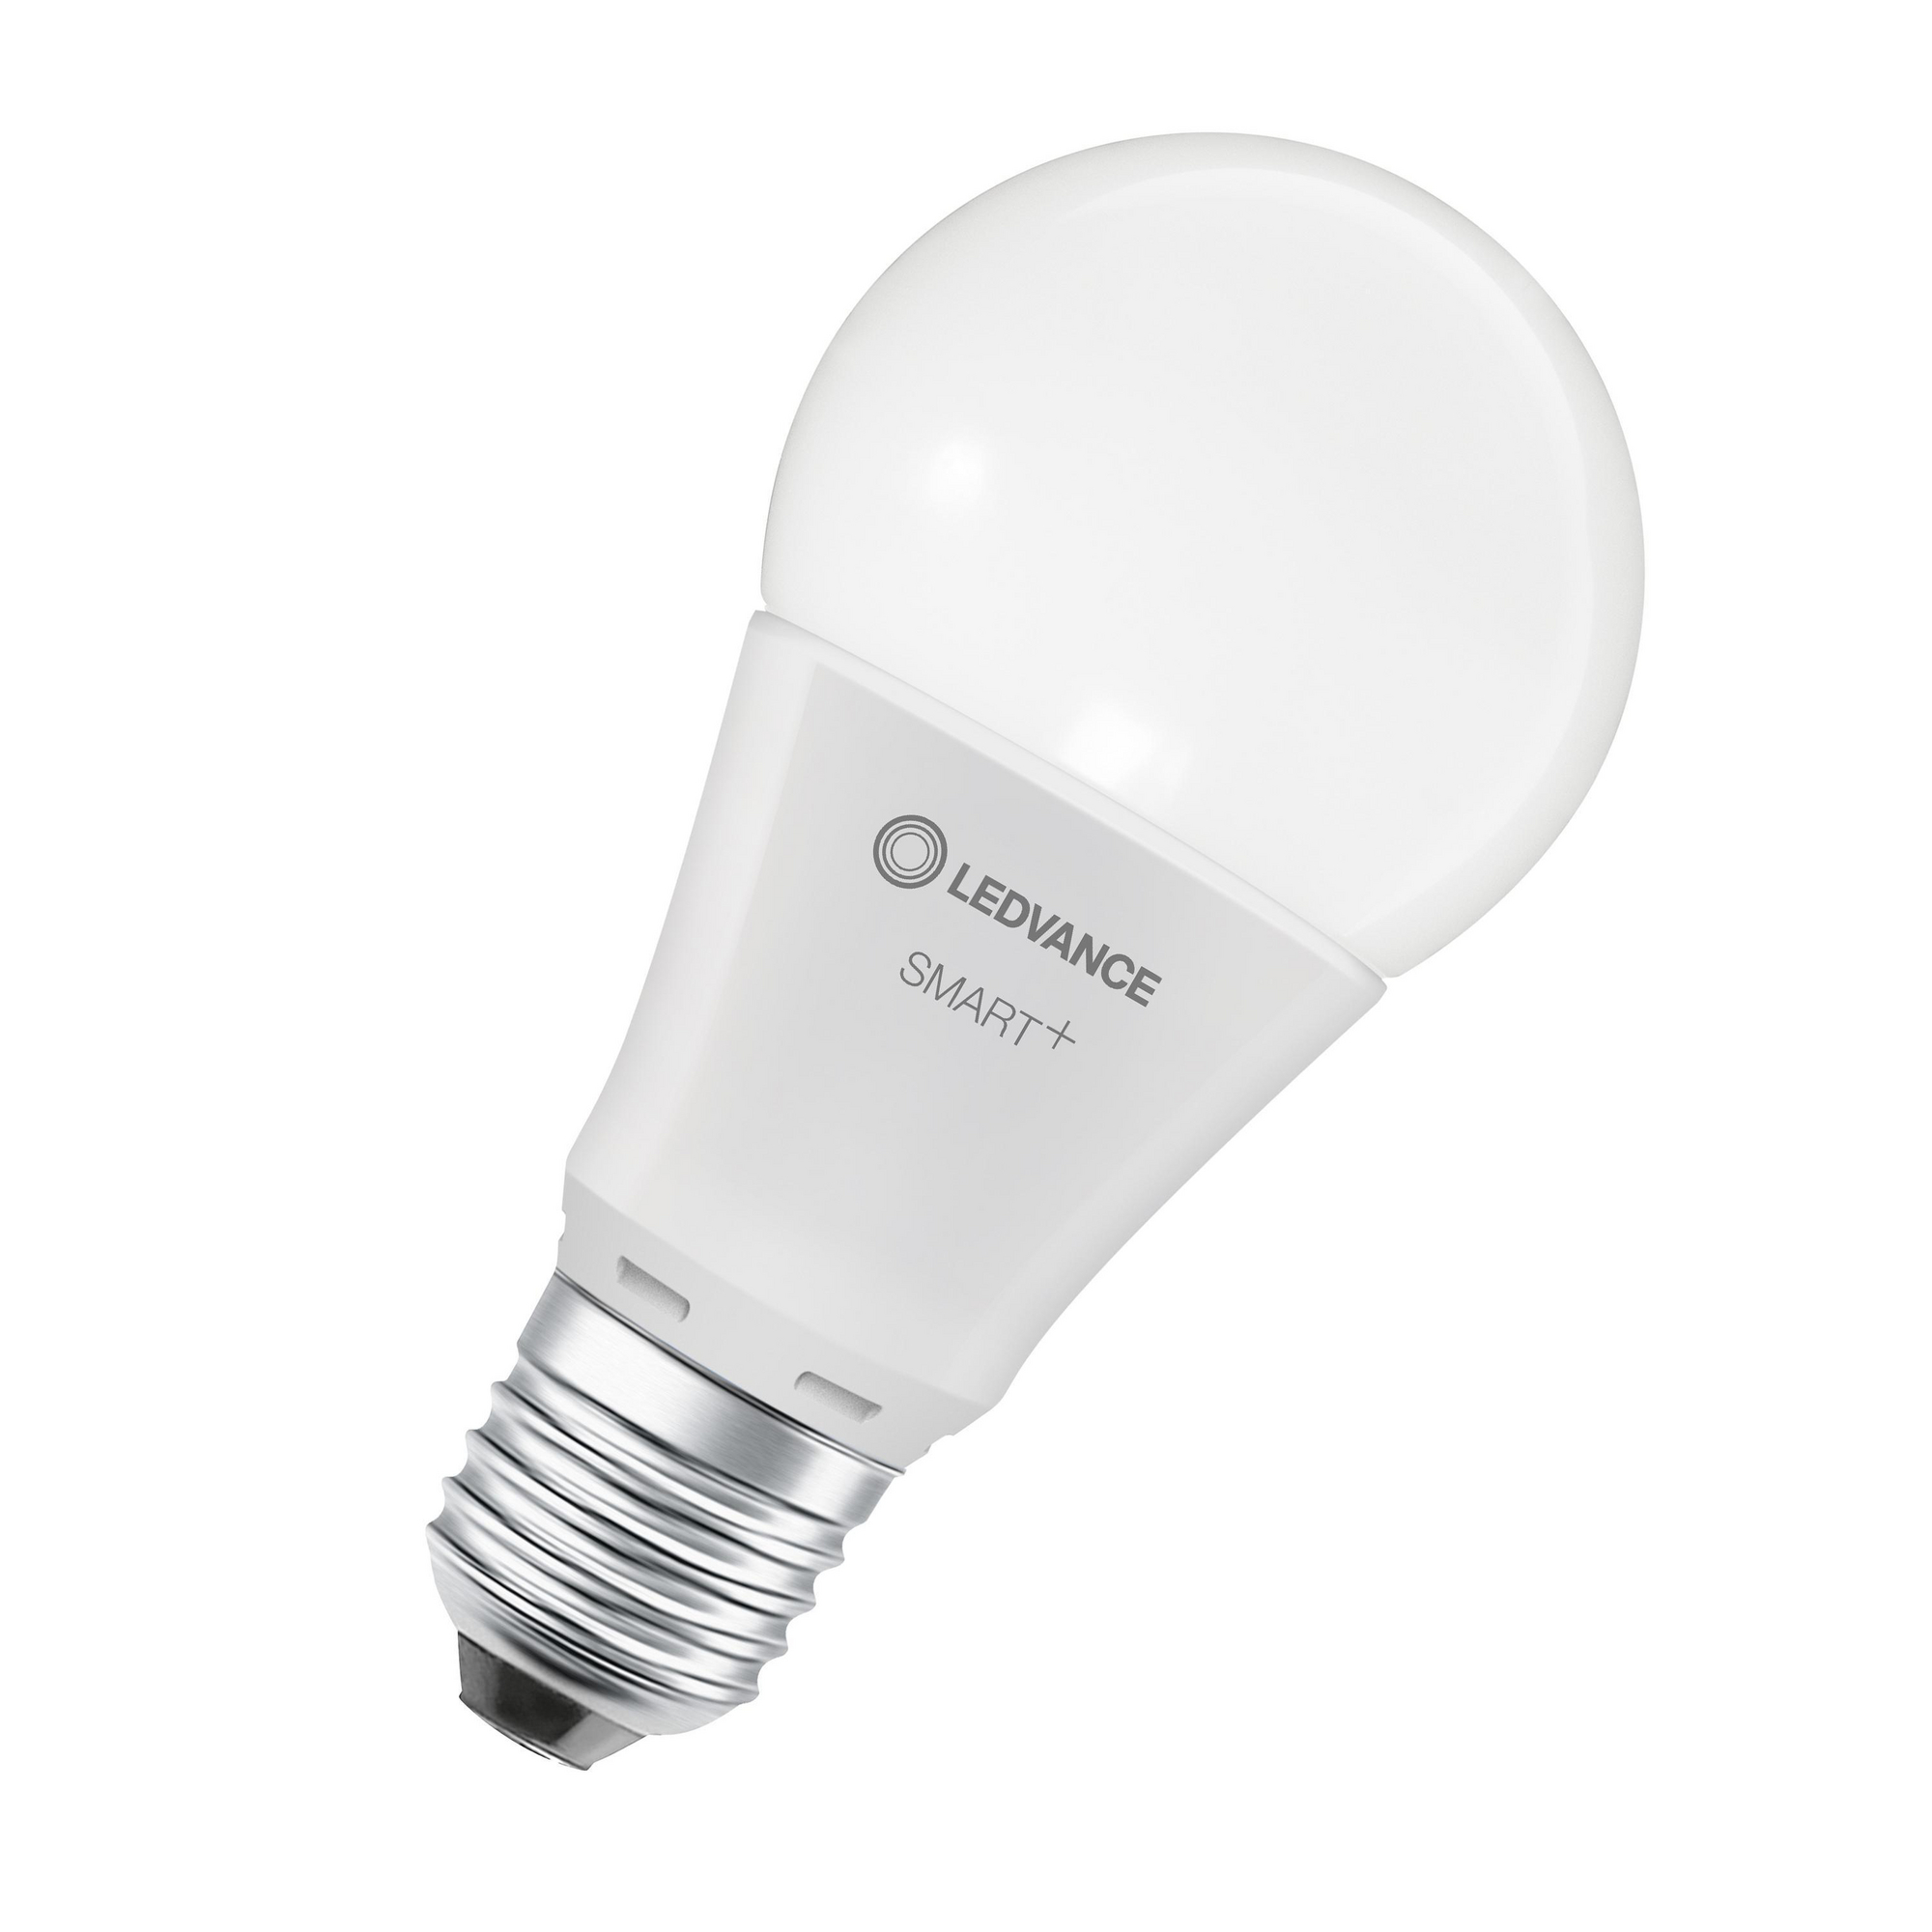 LED-Lampe 'Smart+' 11,5 cm 806 lm 9 W E27 weiß WLAN Tunable White + product picture